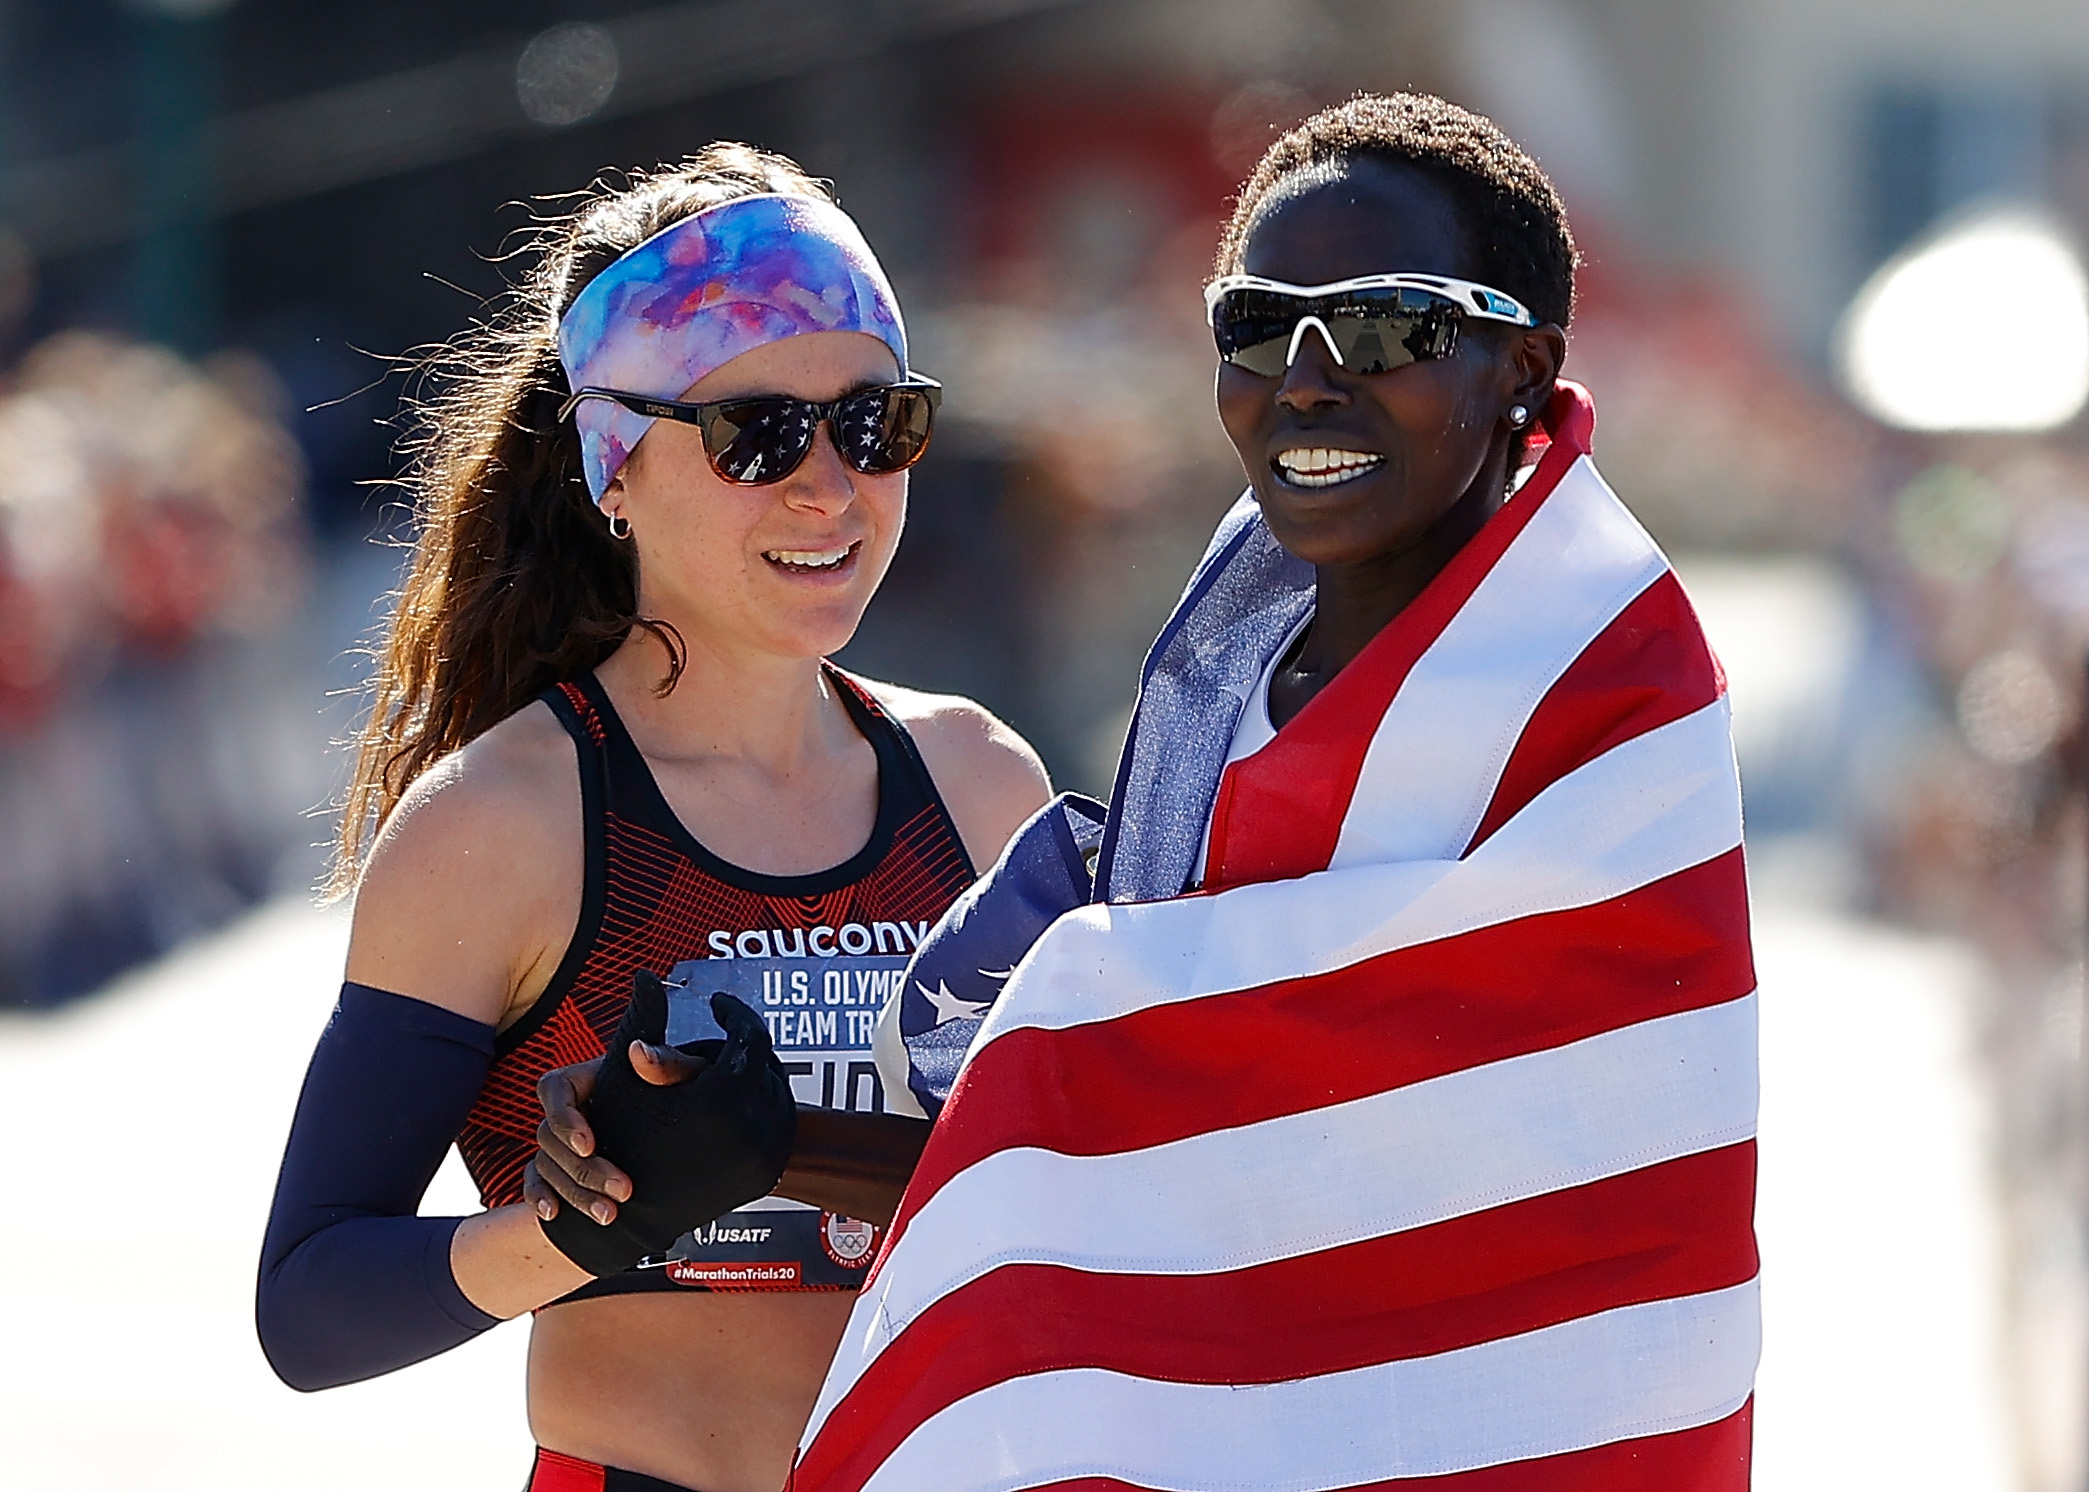 ATLANTA, GEORGIA - FEBRUARY 29: Aliphine Tiliamuk reacts with Molly Seidel after they finished first and second in the Women's U.S. Olympic marathon team trials on February 29, 2020 in Atlanta, Georgia. (Photo by Kevin C. Cox/Getty Images)